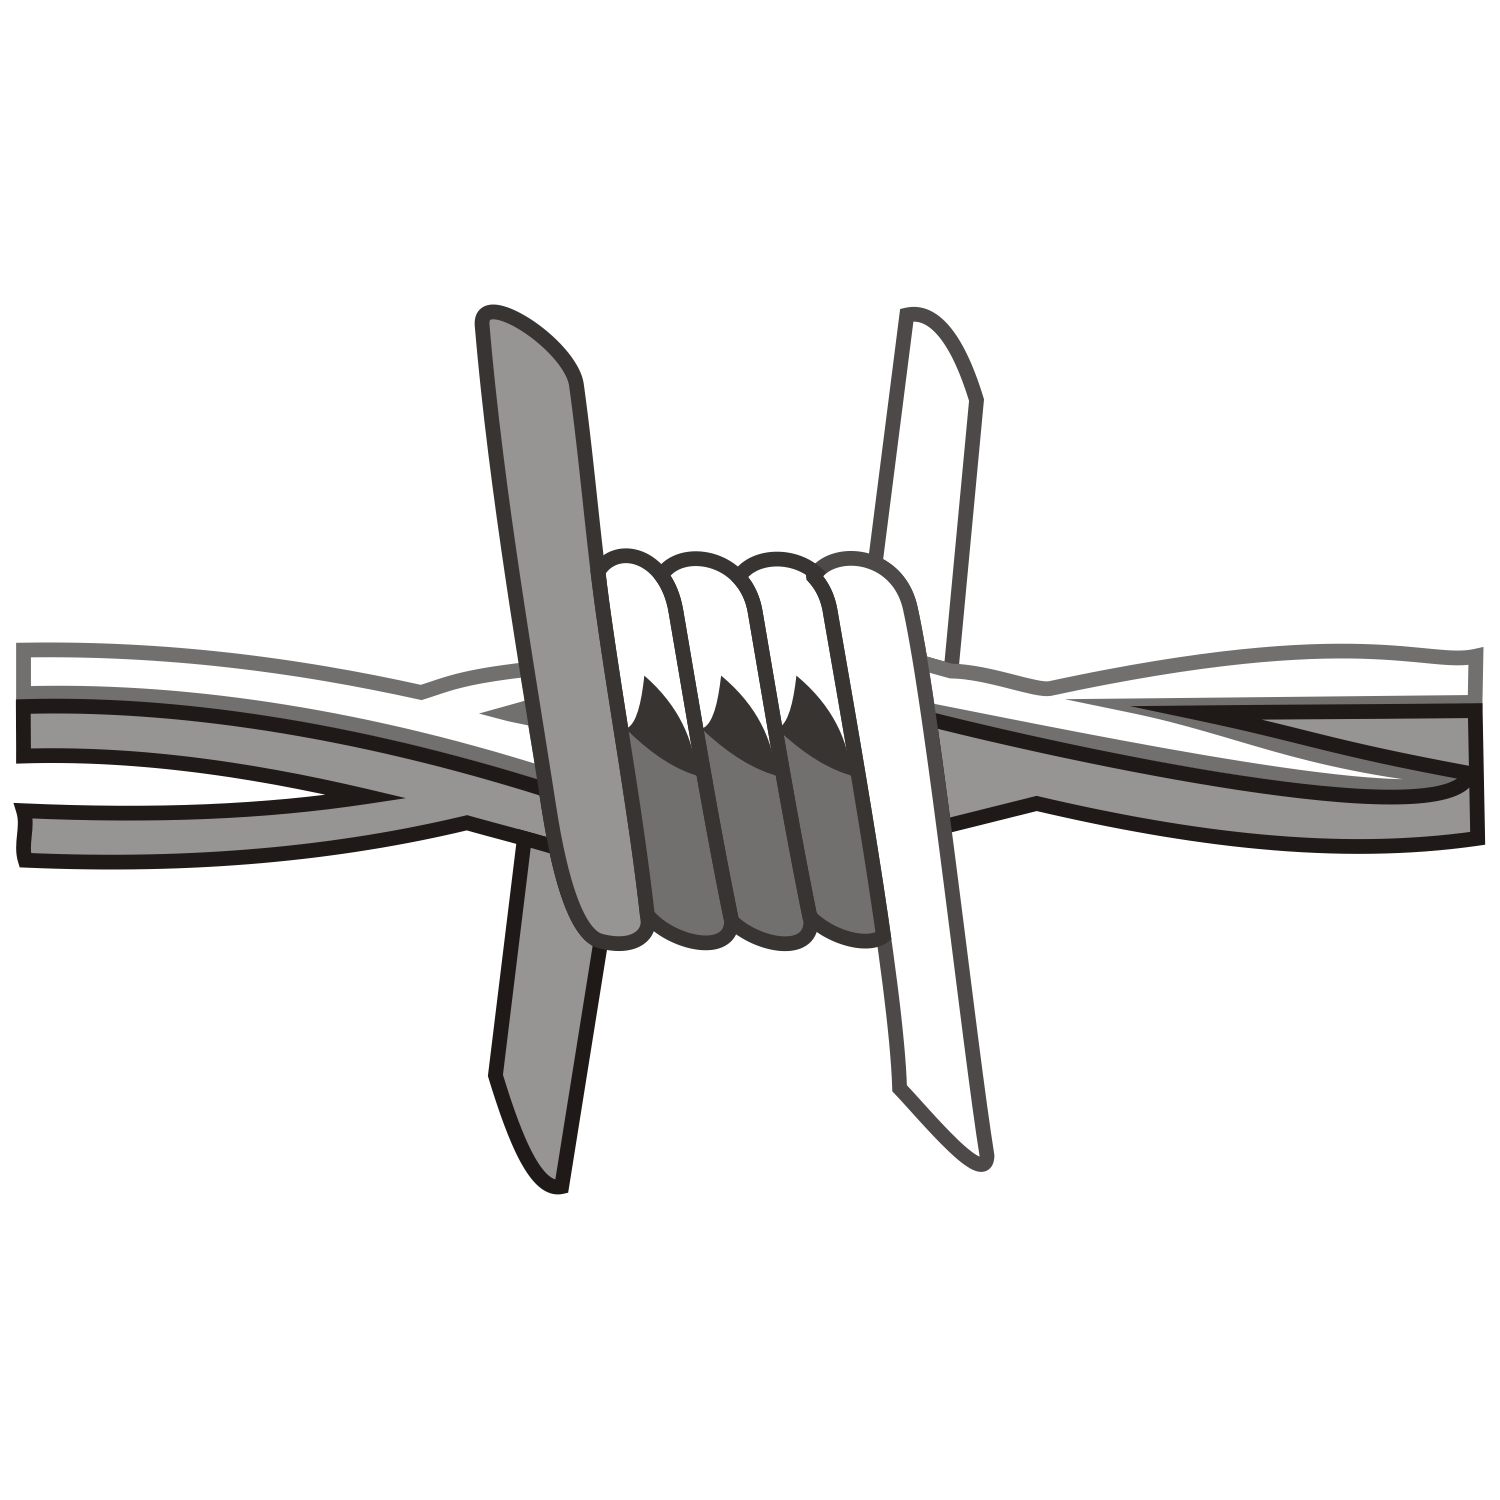 Barbed Wire Png - ClipArt Best